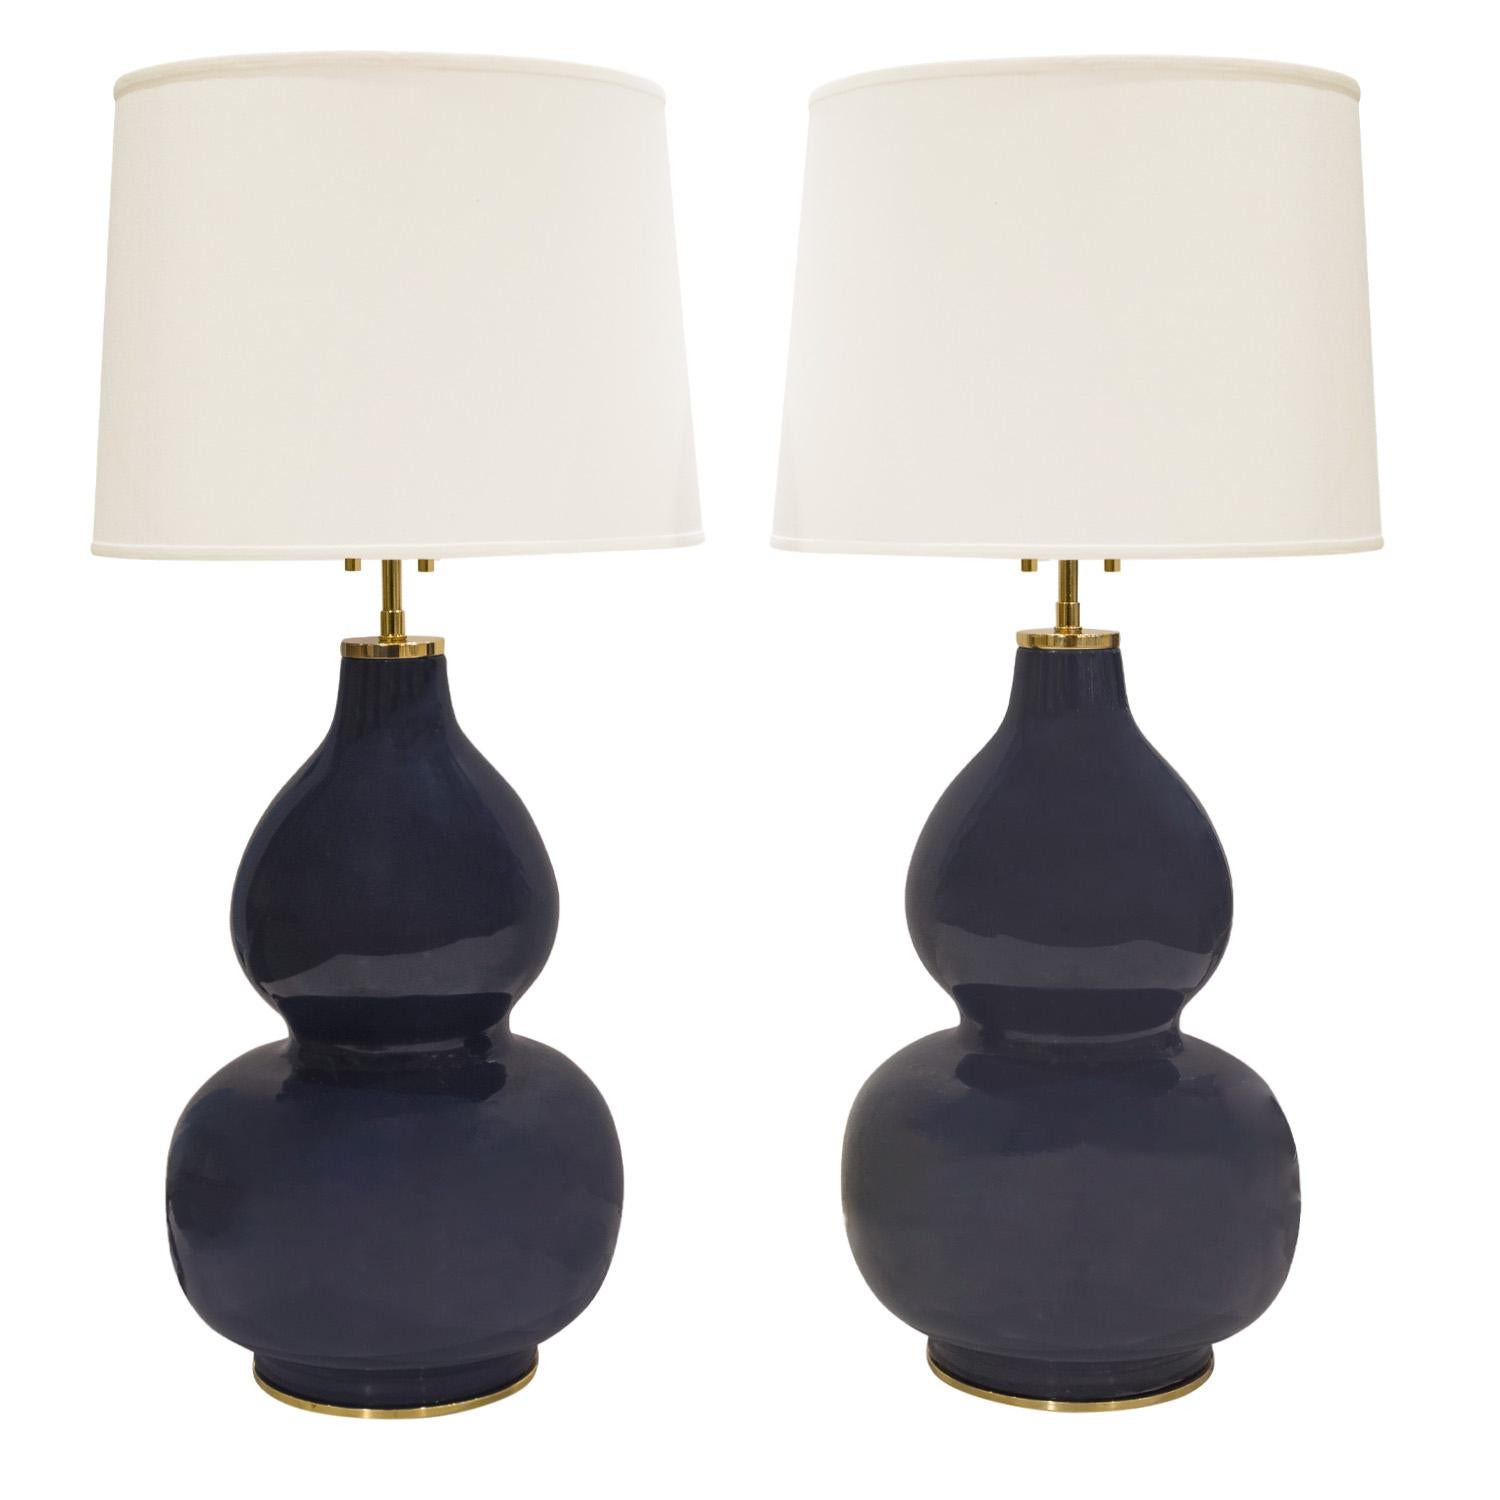 Pair of artisan “Mandarin Table Lamps”, ceramic double gourd forms with deep blue mirror glaze, with polished brass bases and hardware by Karl Springer American 1980's. These lamps are exquisite. Brass has been polished and lacquered. Newly rewired